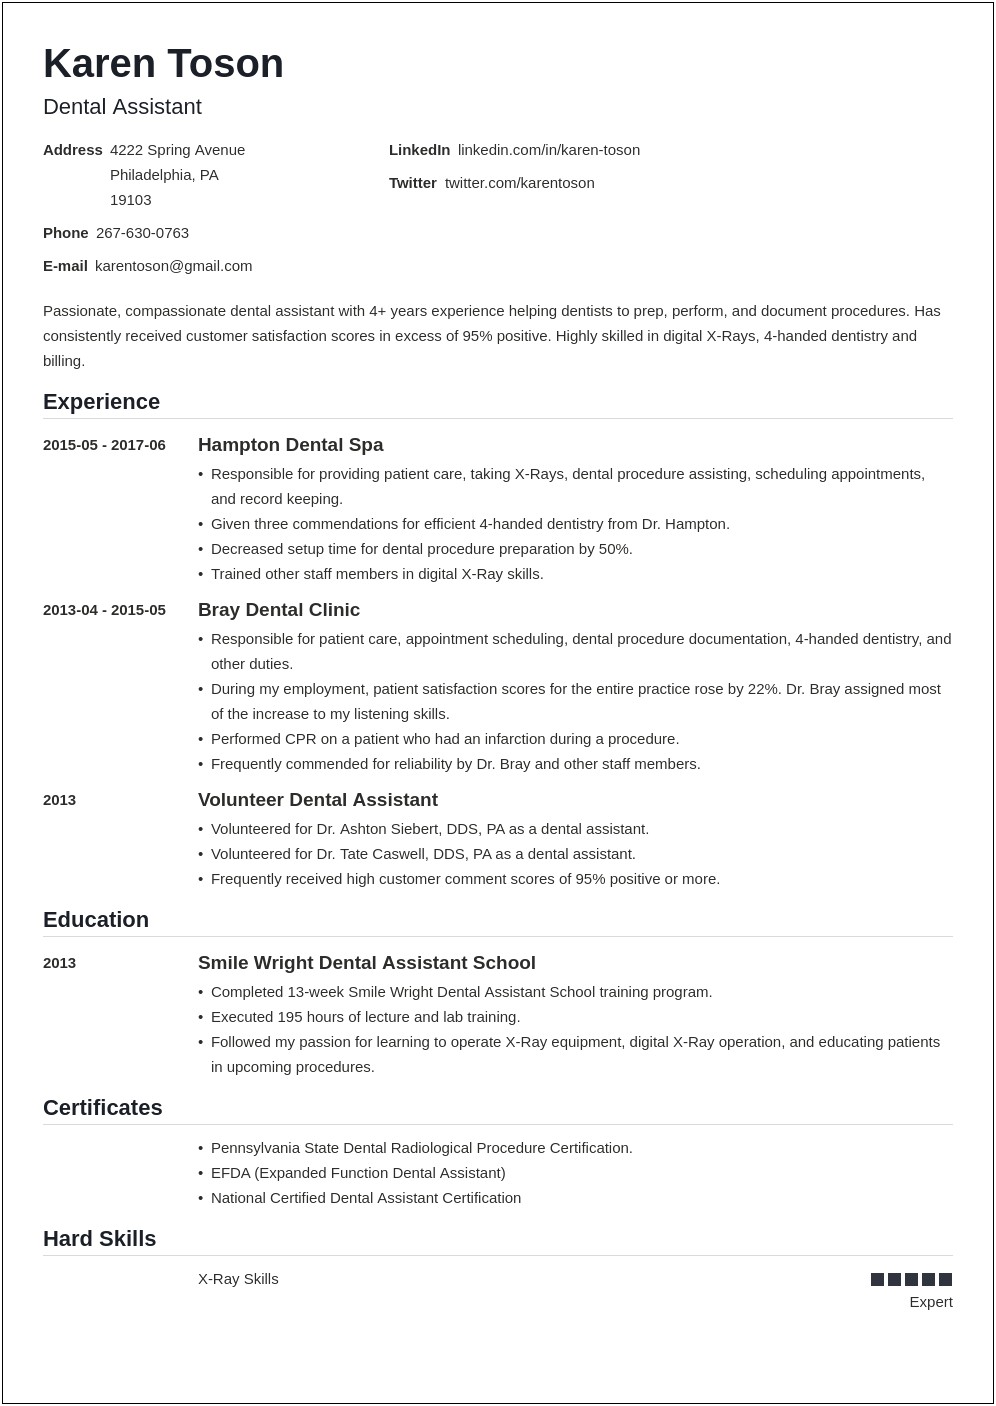 Resume Cover Letter Dental Assistant No Experience